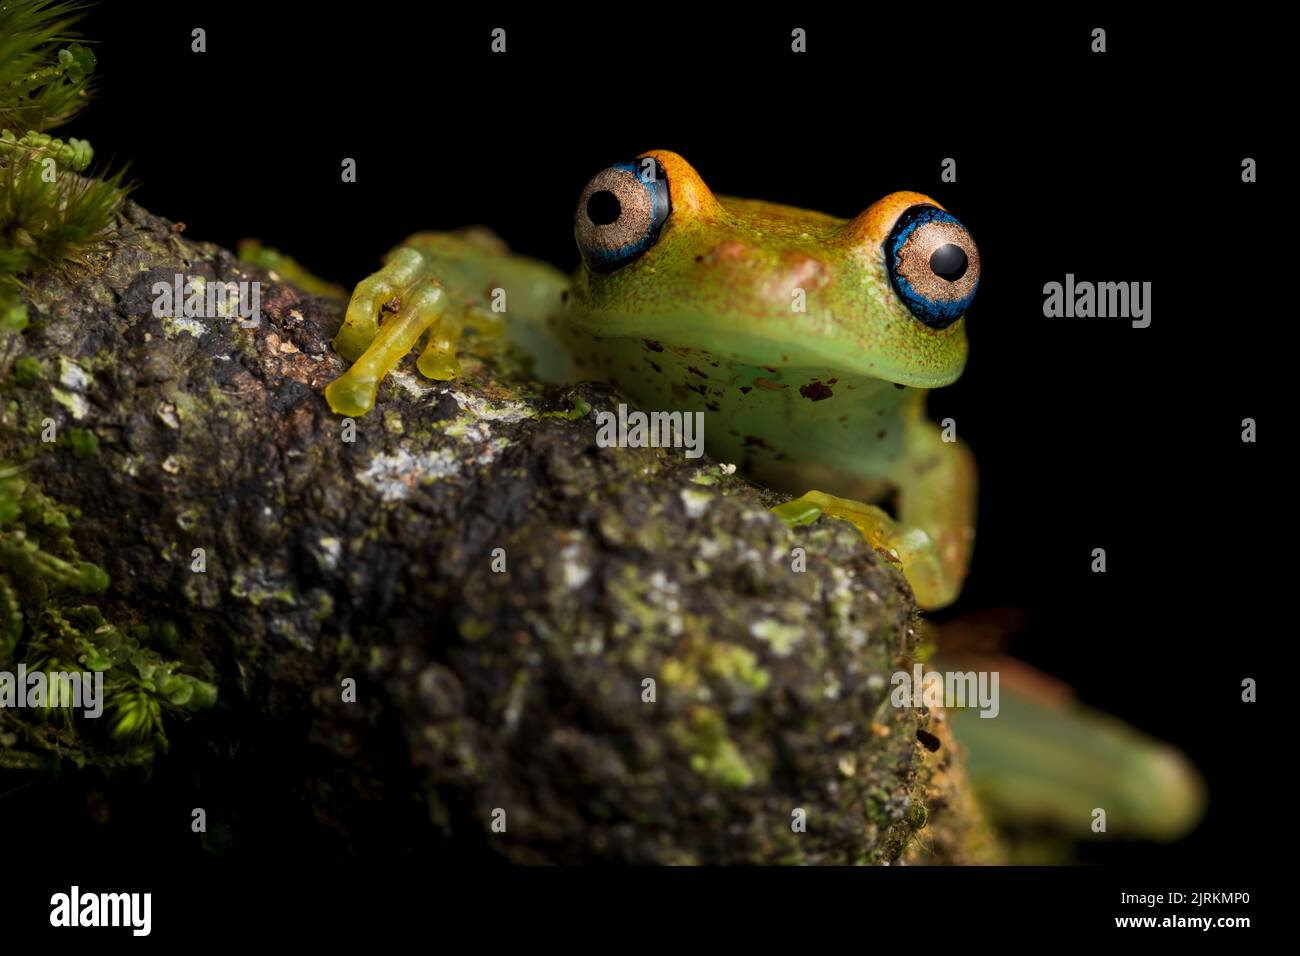 Boophis viridis: Green toad from Madagascar Stock Photo